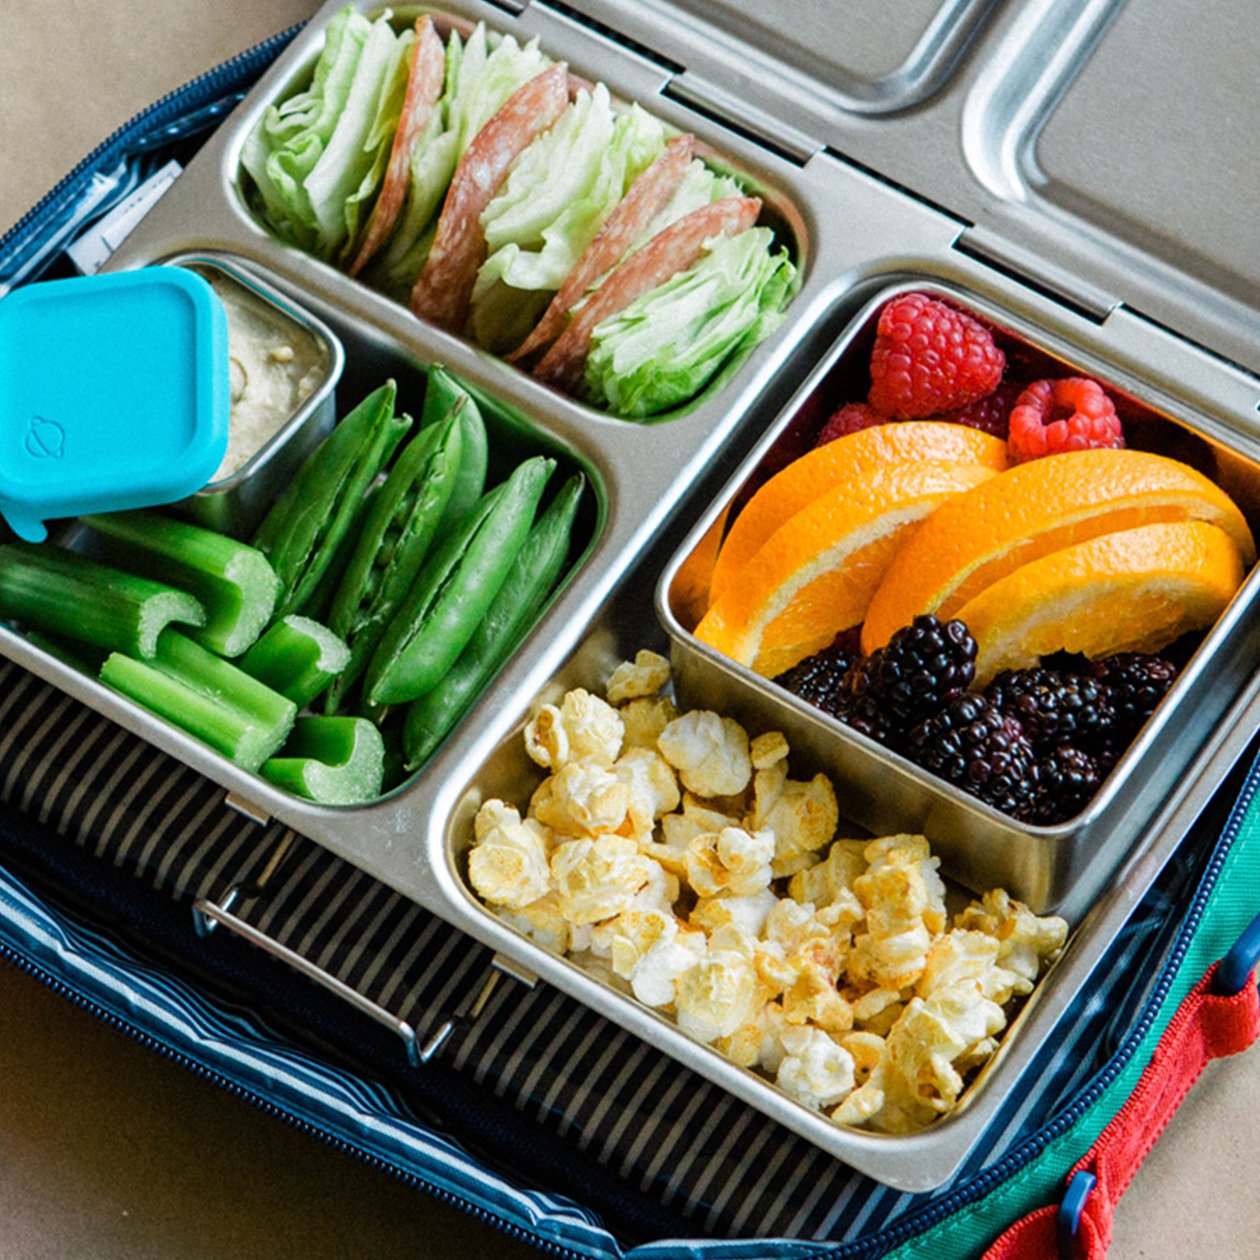 PlanetBox LAUNCH Little Square Dipper - phunkyBento